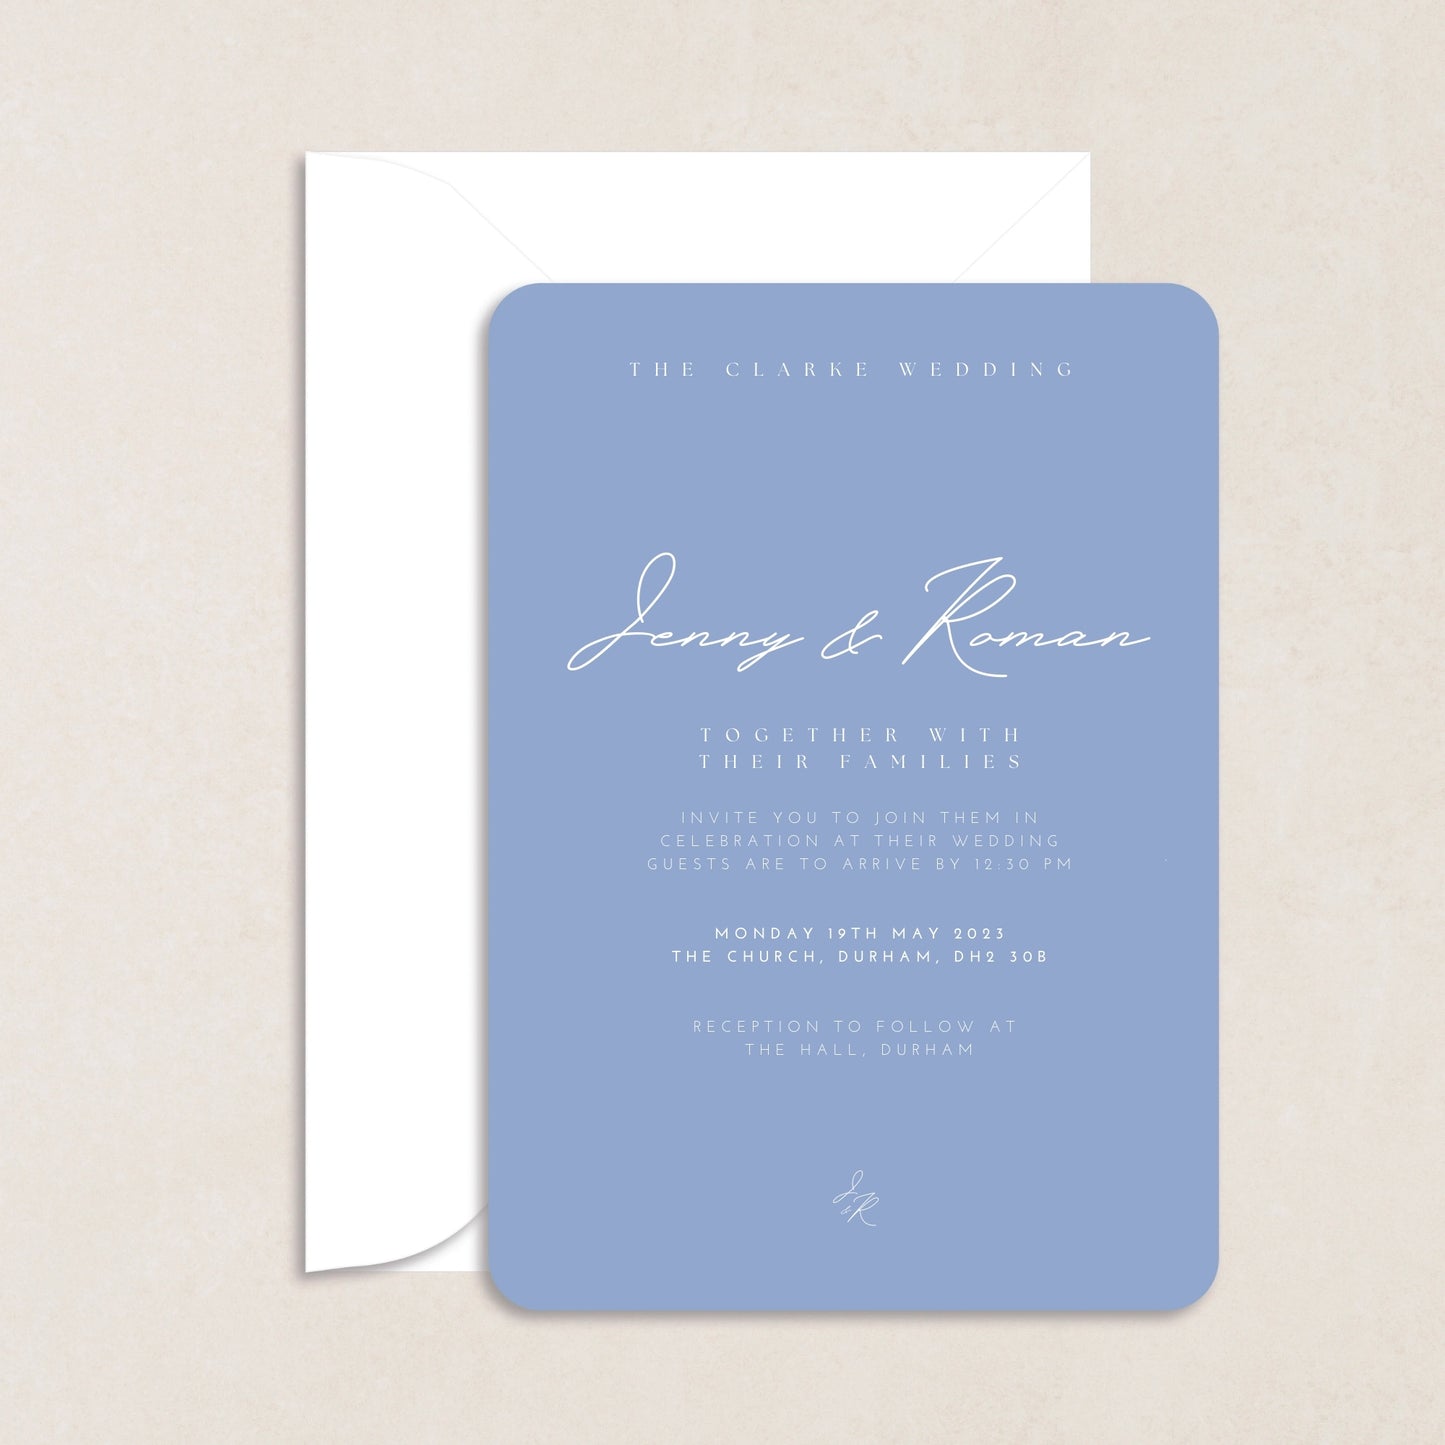 Jenny Wedding Invitations - Wedding Invitations available at The Ivy Collection | Luxury Wedding Stationery